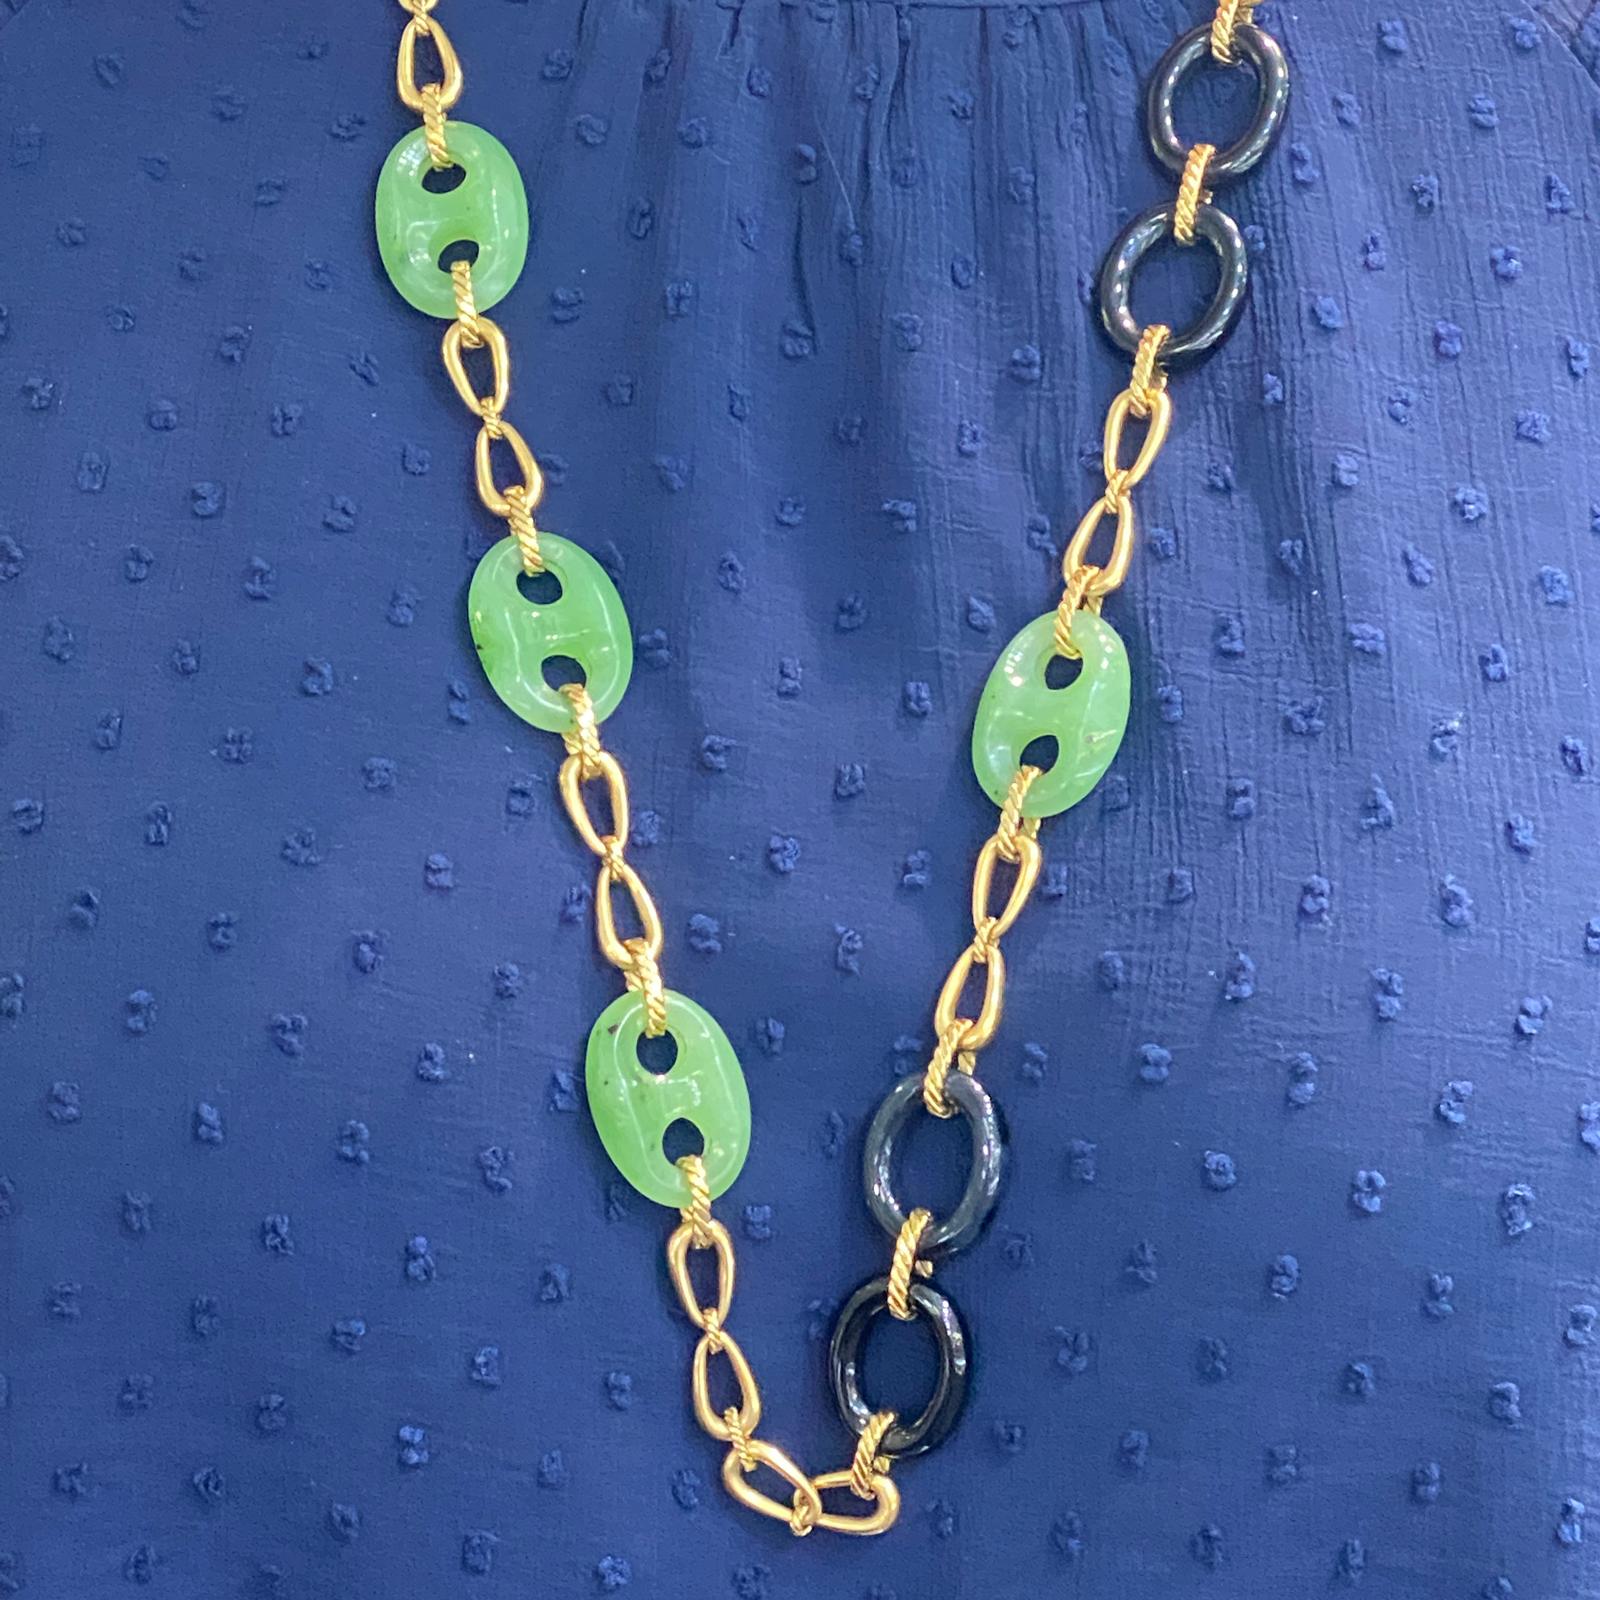 Chic jade, onyx, and 18 karat yellow gold link necklace circa 1960's. The 28 inch necklace features 7 jade gucci style links and 6 oval onyx links. The necklace is meant to be worn long-there is no clasp. 